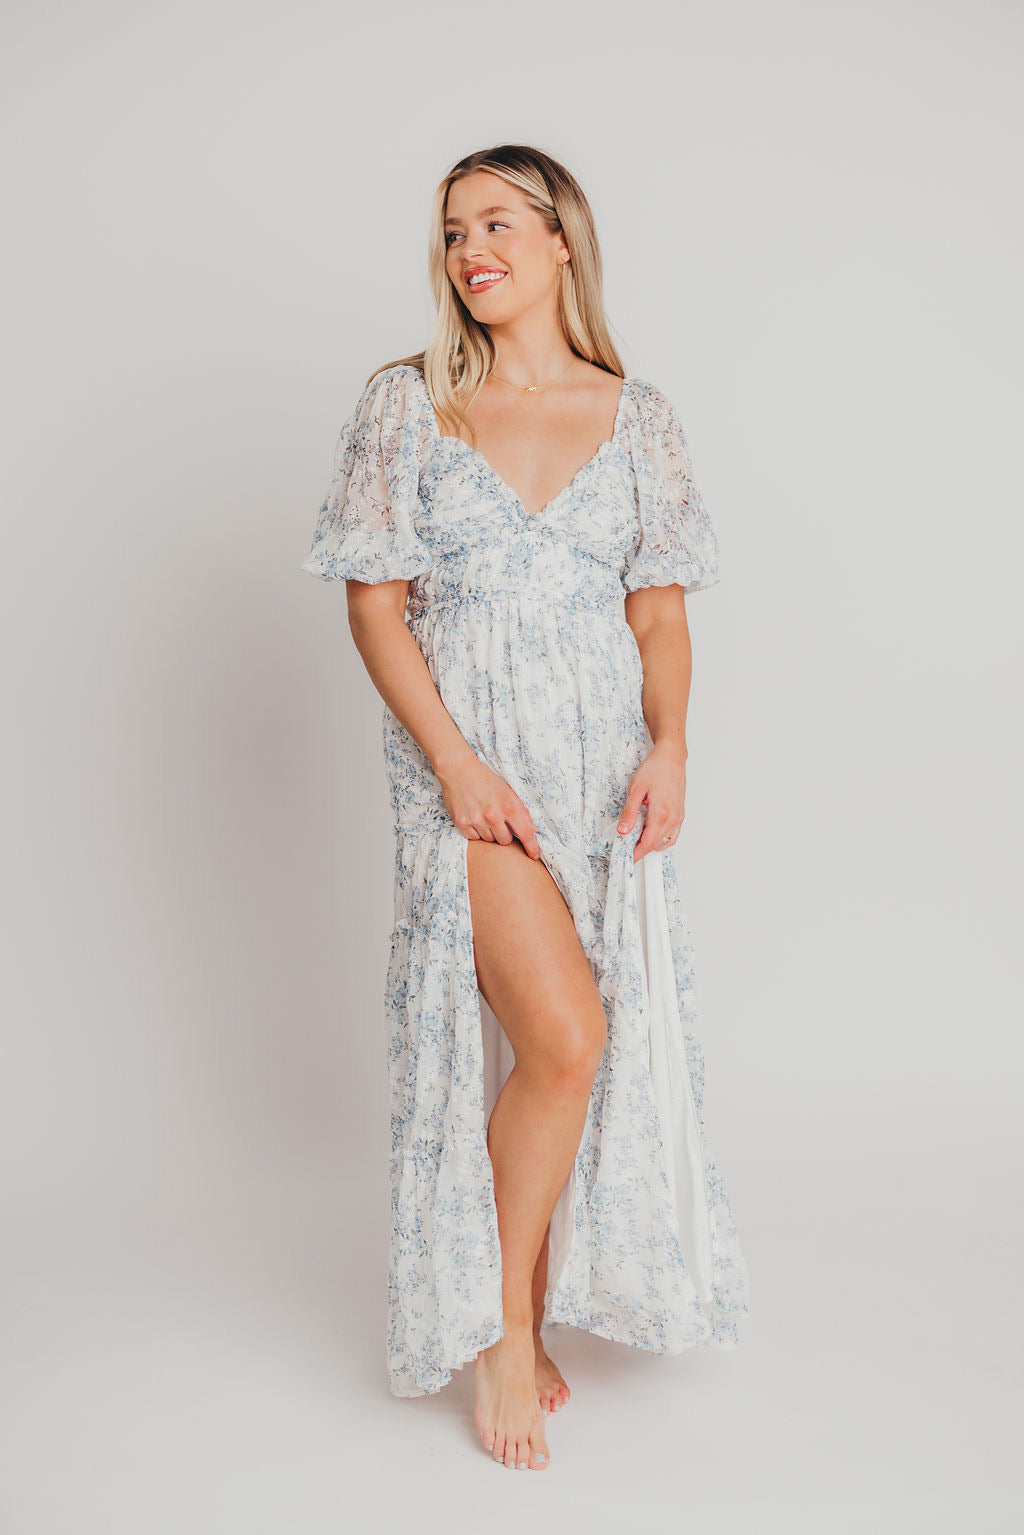 Daphne High Slit Eyelet Detail Maxi Dress in Blue and White Floral - Bump Friendly Inclusive Sizing (S-3XL)